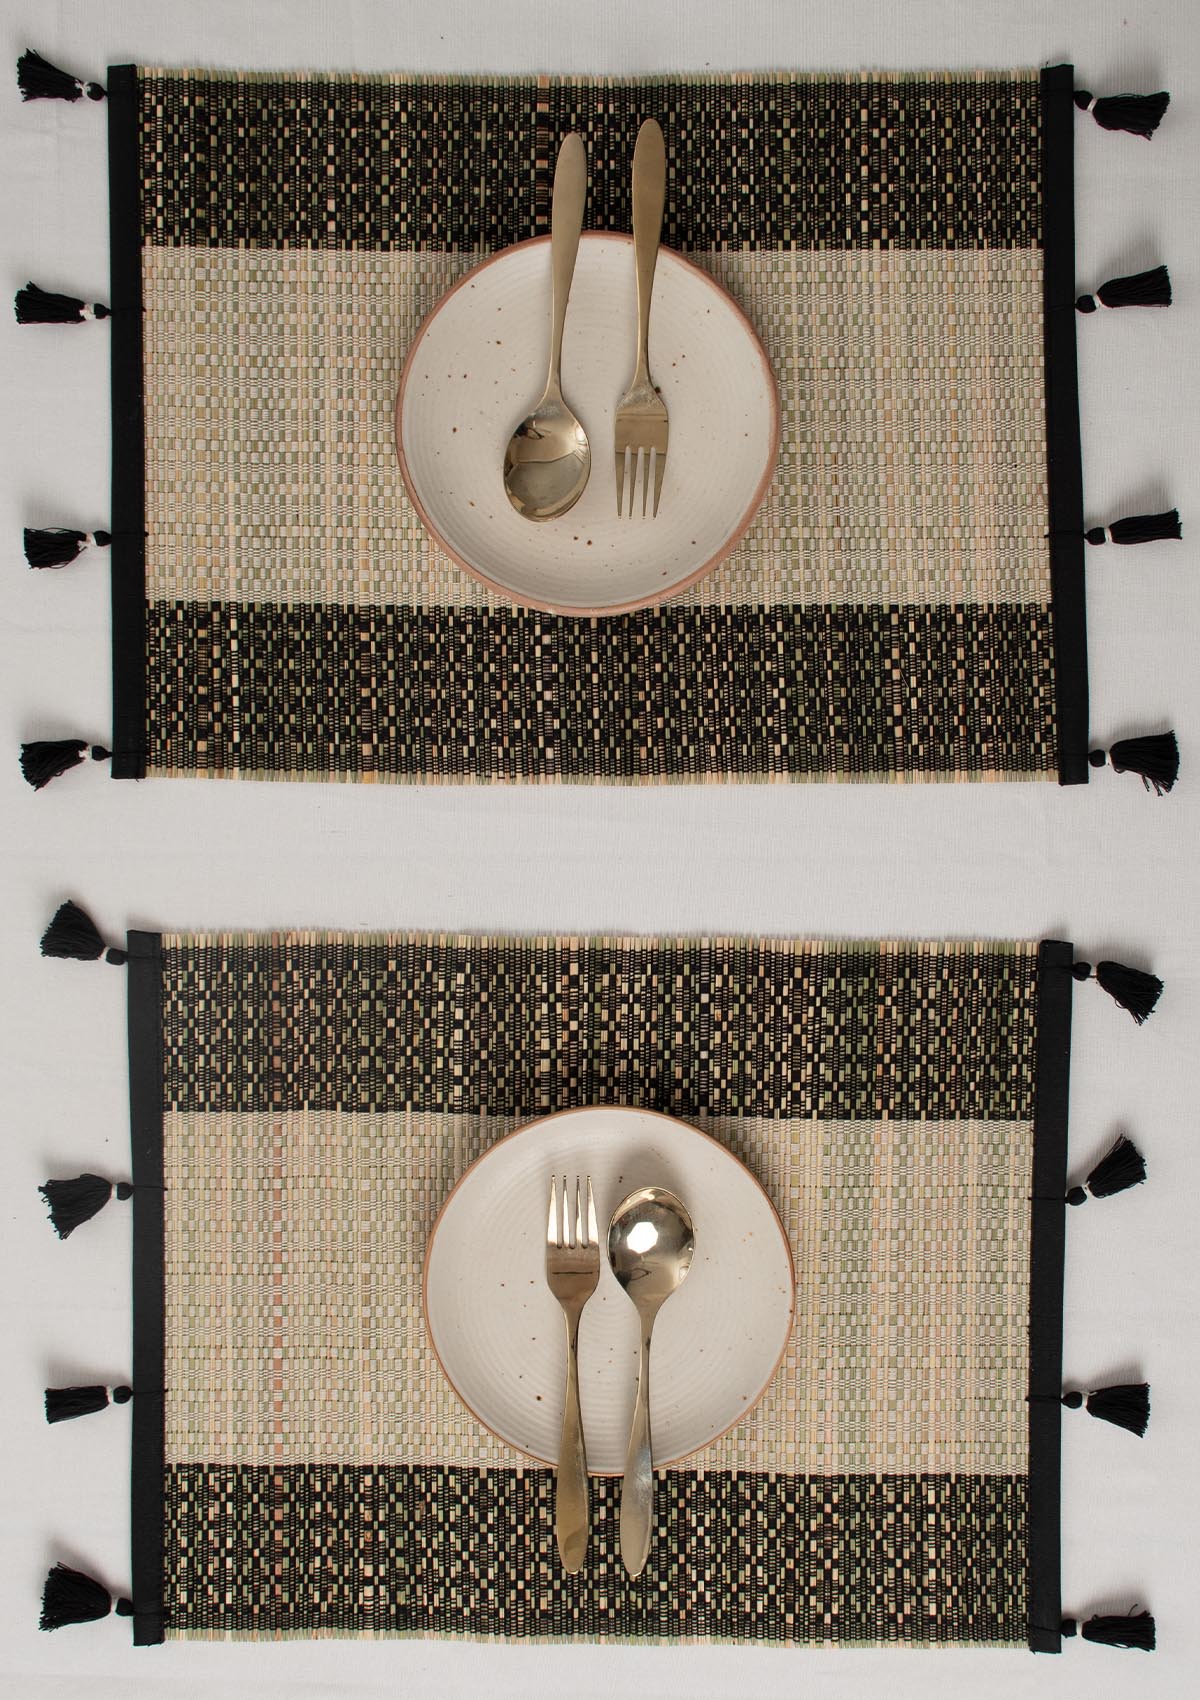 Yin yang woven 100% cotton boho placemat for 4 seater or 6 seater dining - Black